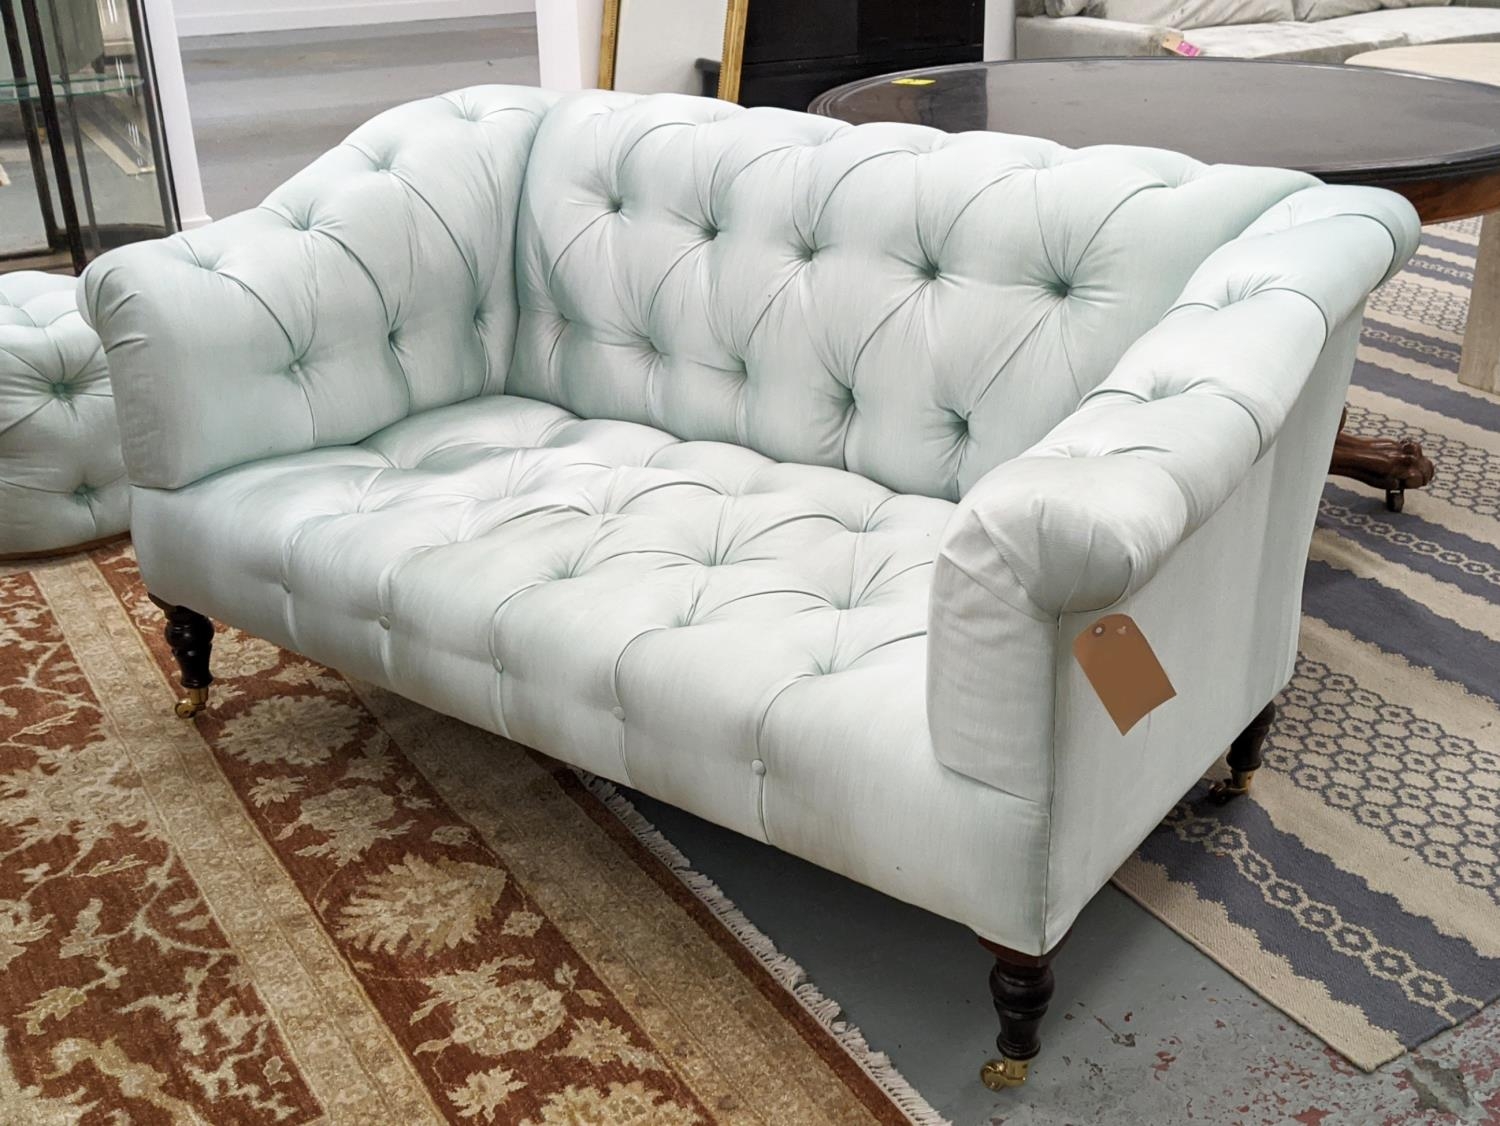 GEORGE SMITH SOFA, two seater, deep buttoned with light turquoise upholstery, 166cm W x 90cm H x